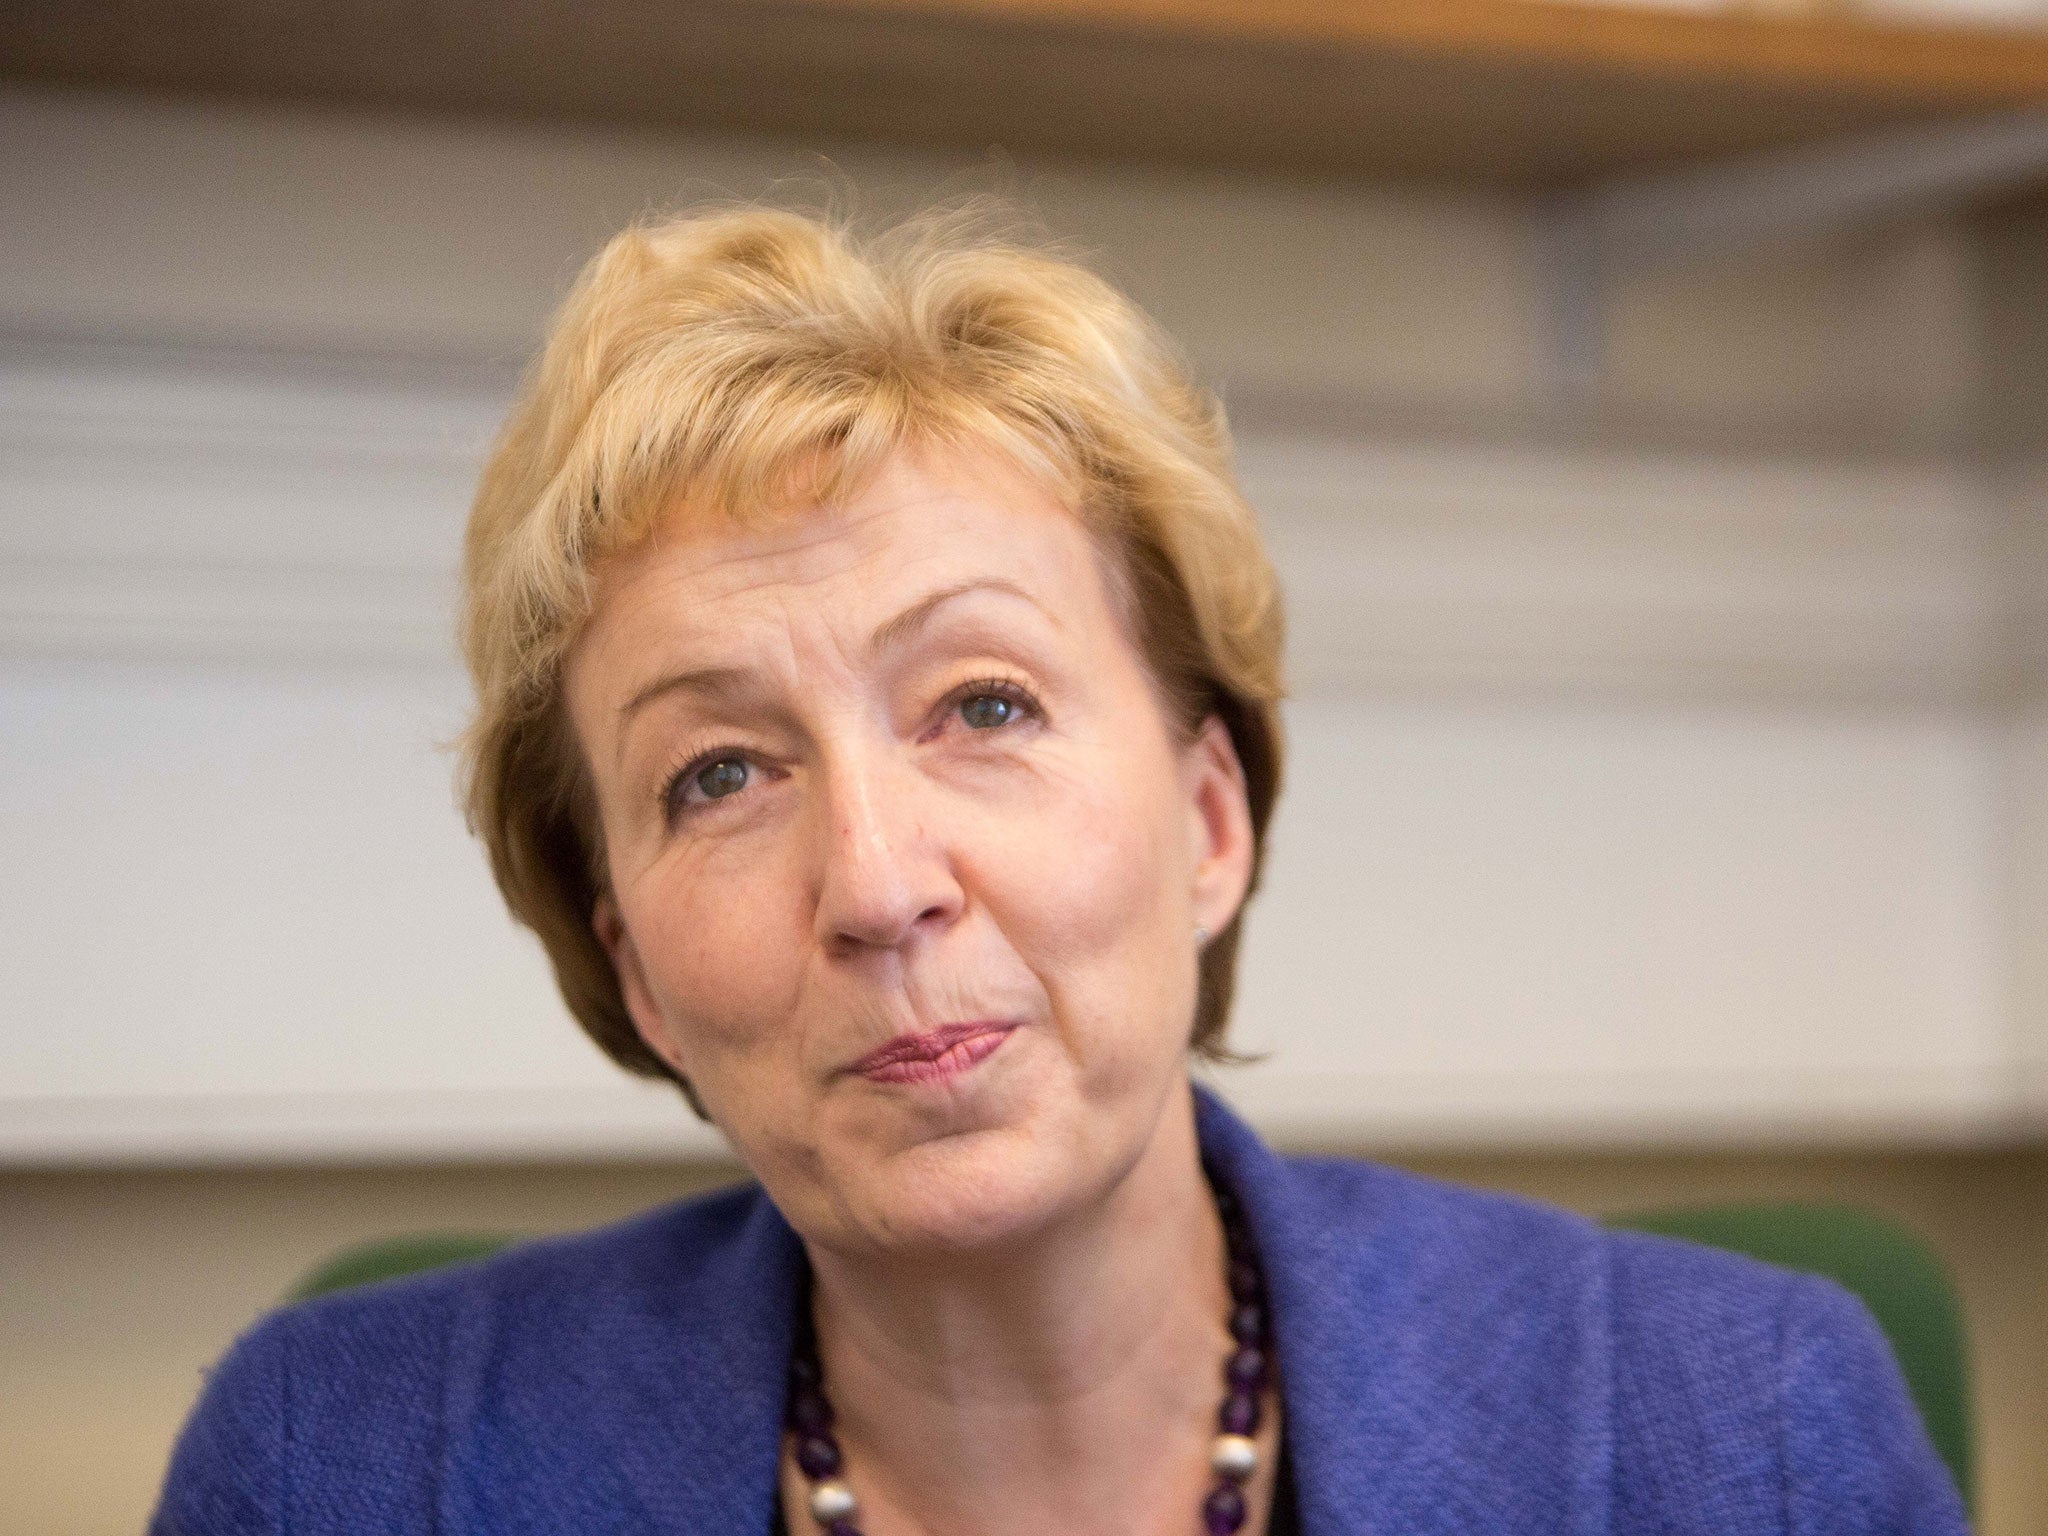 Andrea Leadsom is the current economic secretary to the Treasury